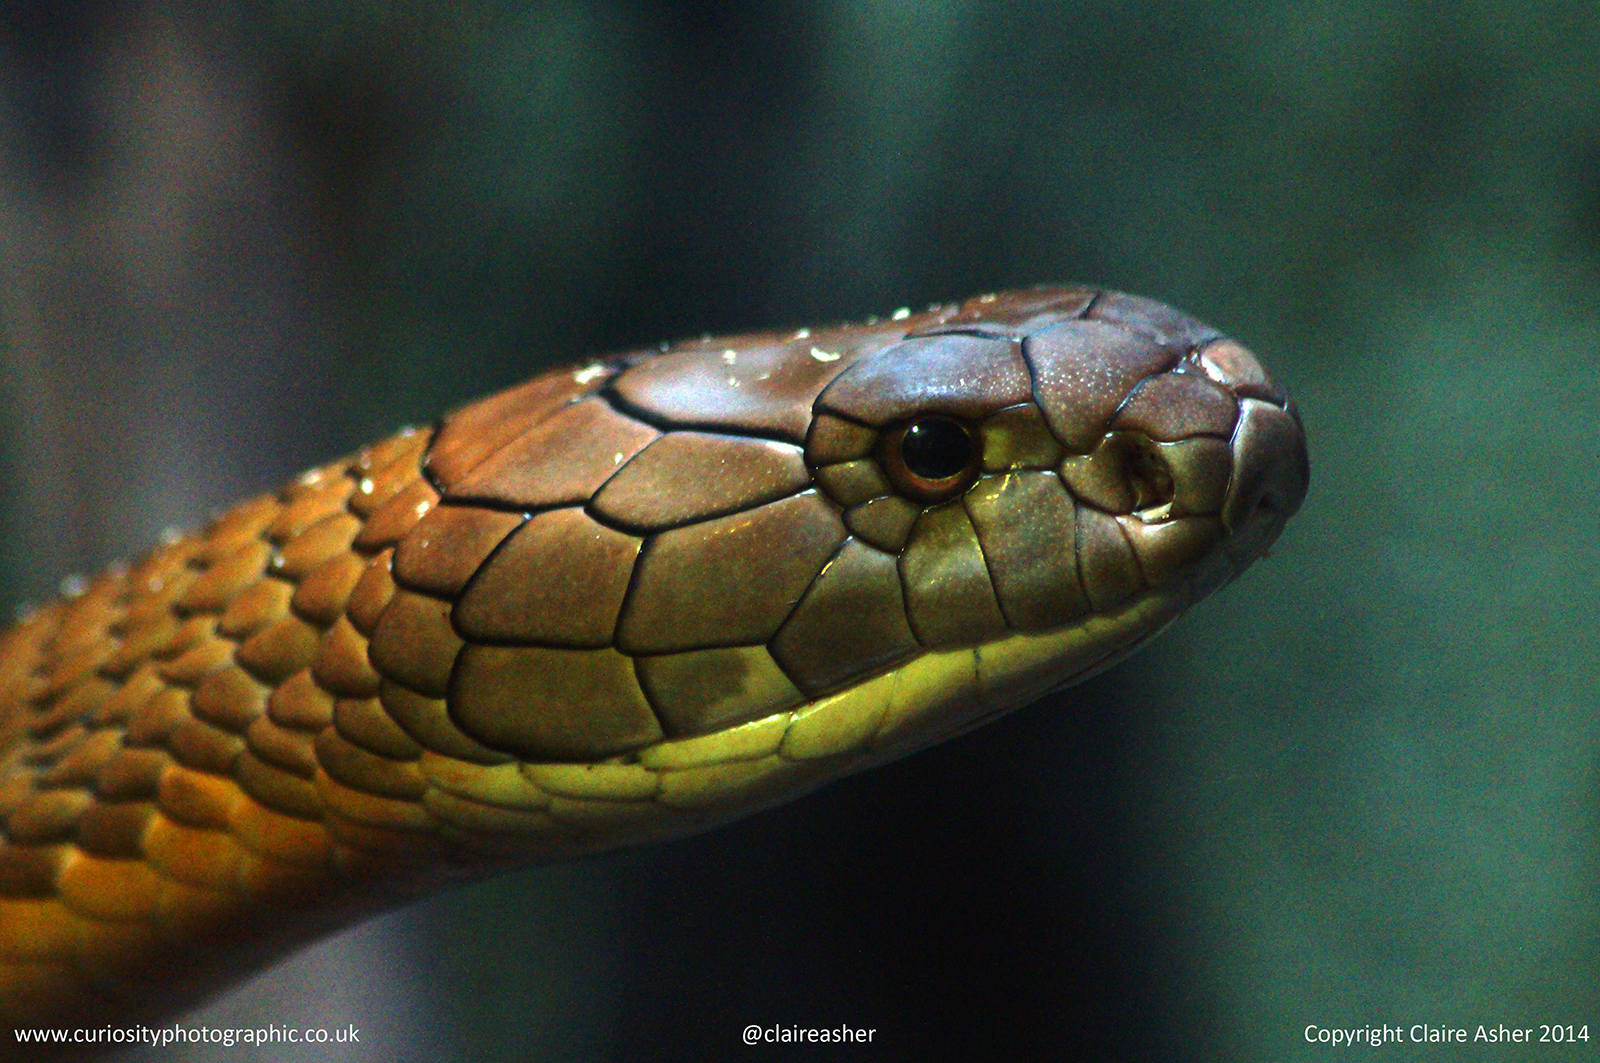 A cobra photographed in captivity in 2014.